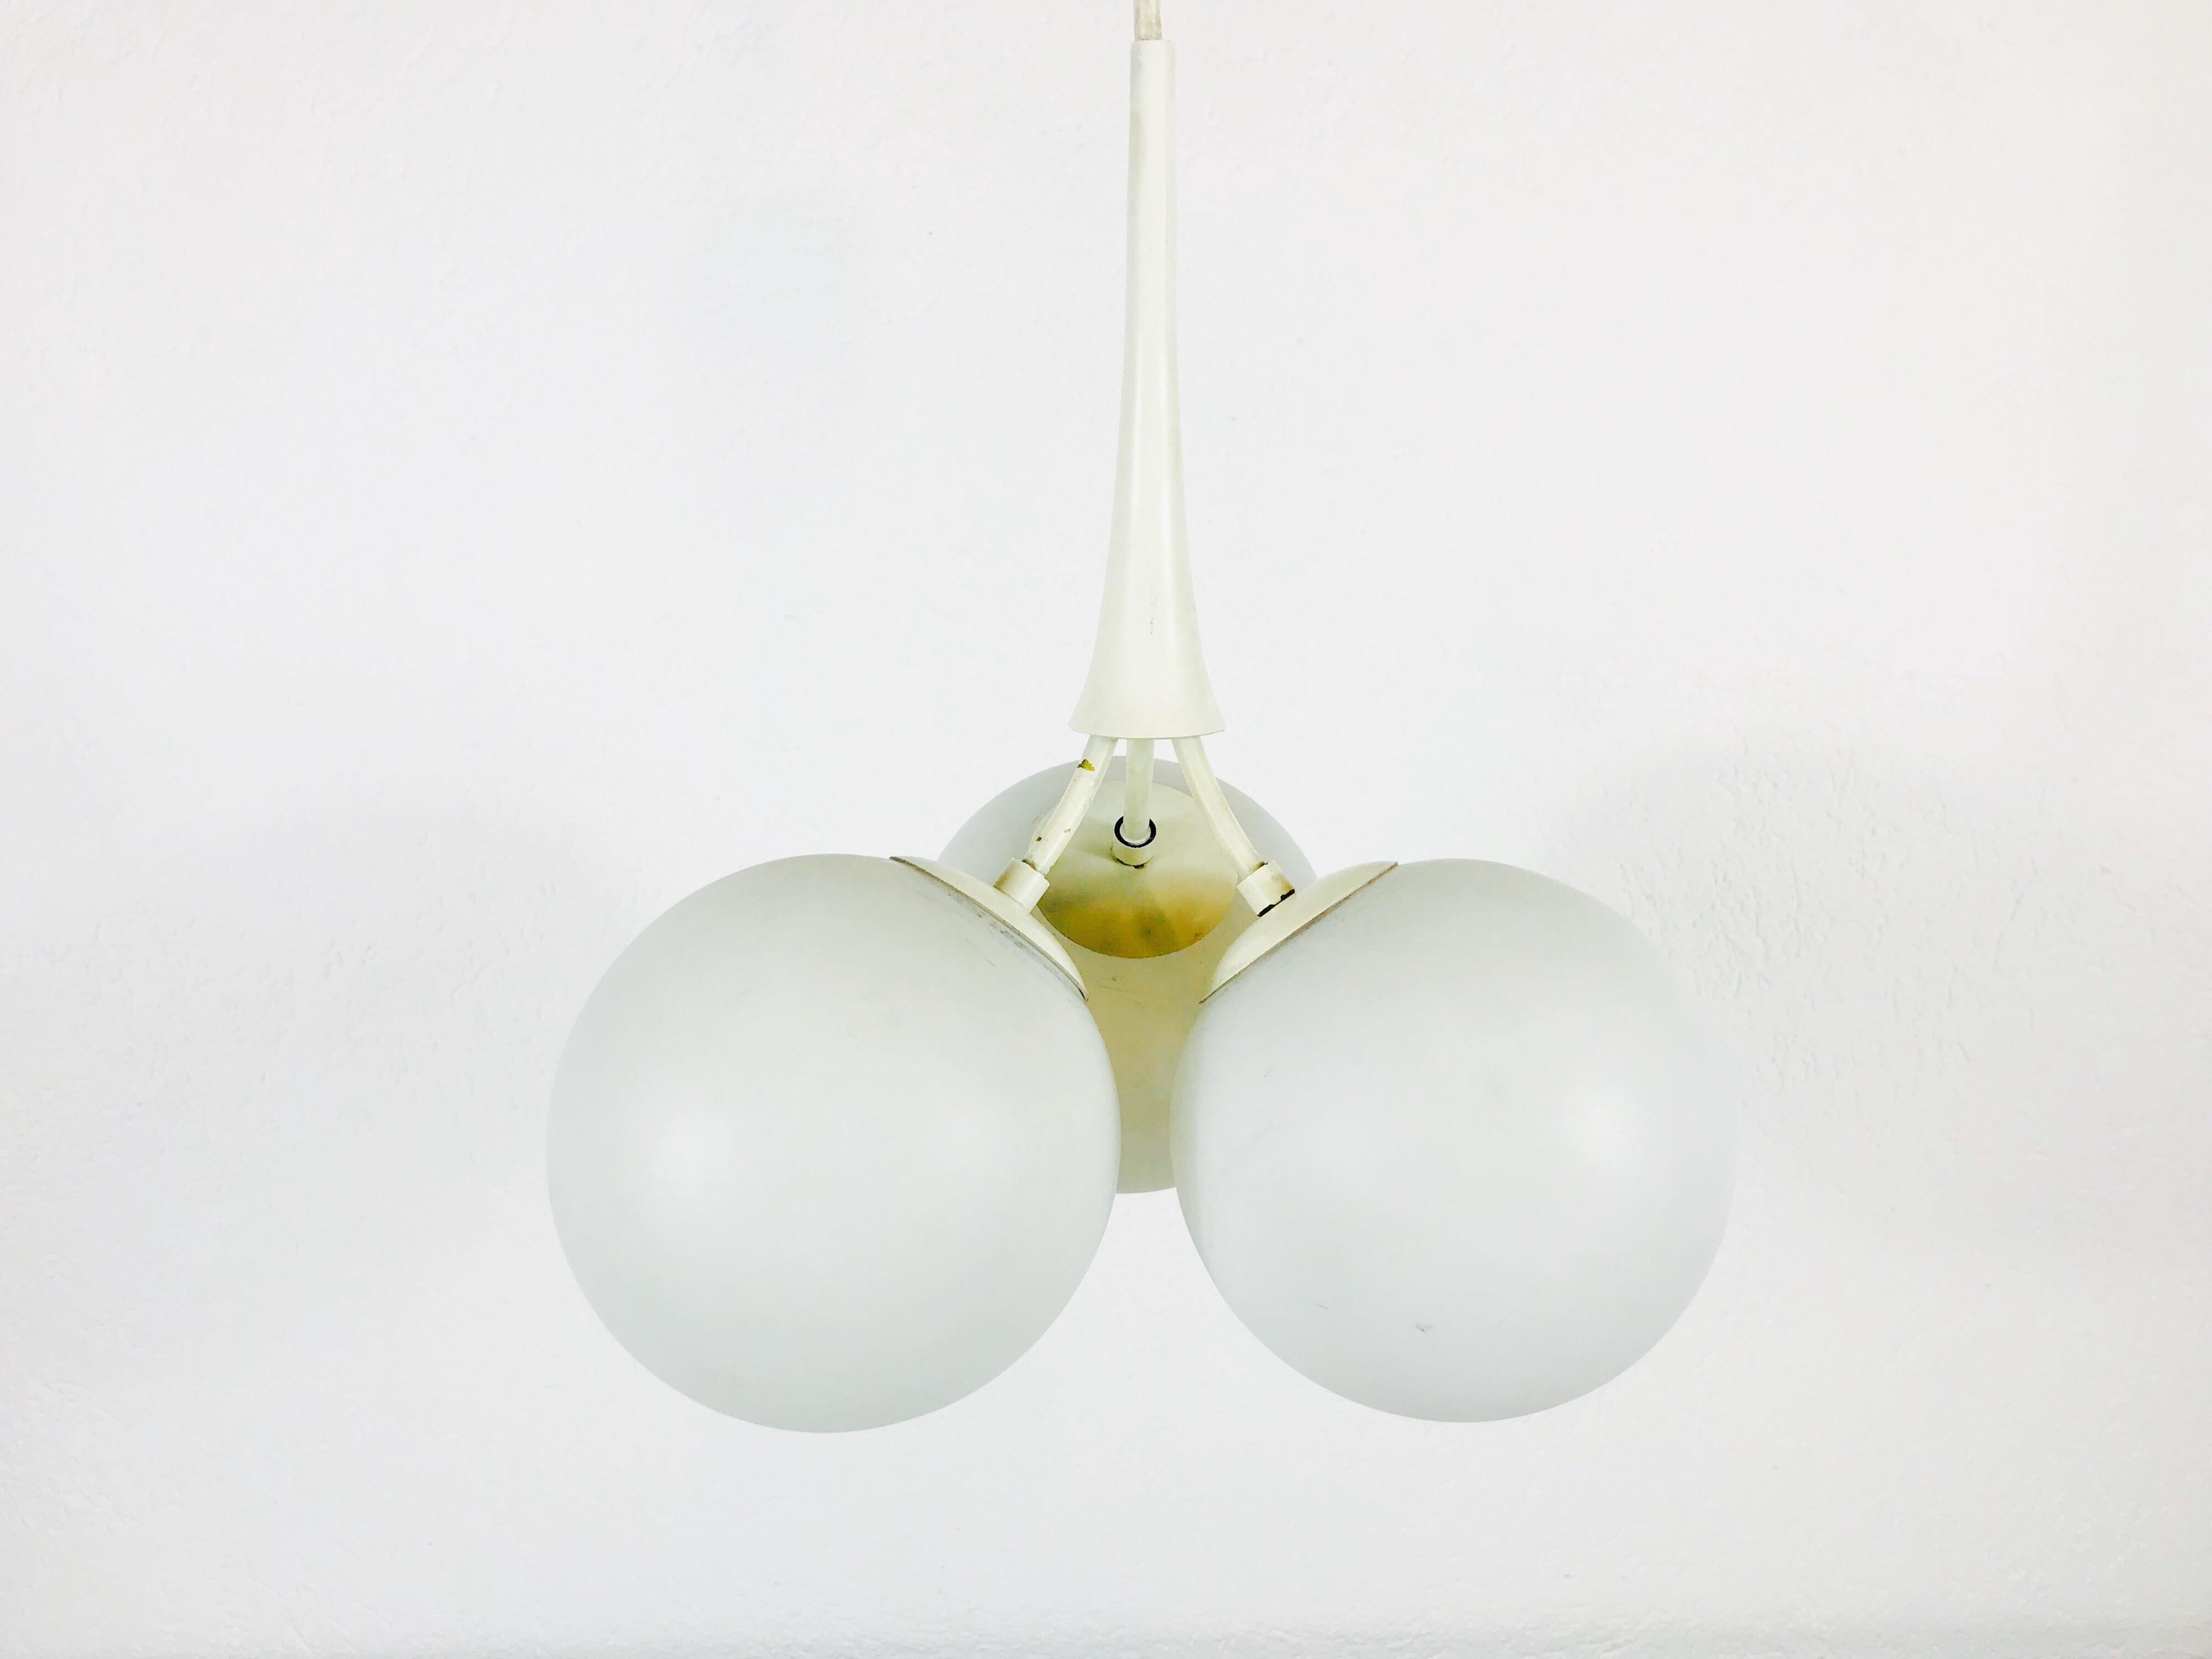 A Space Age design hanging lamp made in Germany in the 1970s. Three opaline glass balls secure to the white metal body. The short arms are also made of metal.

Measurements:

Height: 60 cm

Diameter: 28 cm

The light requires three E14 light